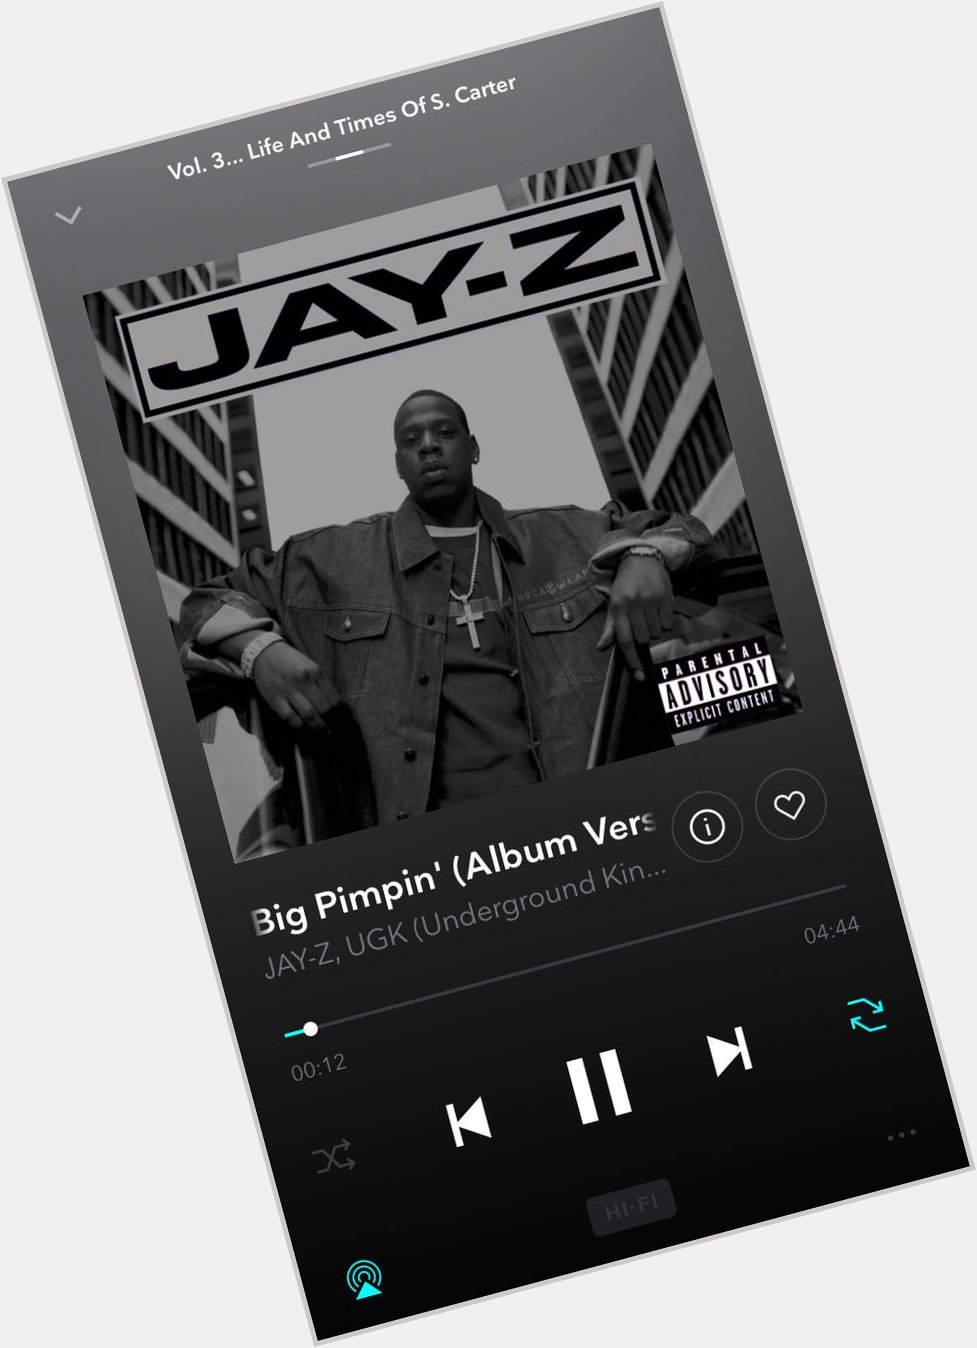 Happy Bday Hov & RIP Pimp C all on one day 
Laugh & cry does live in d same house 